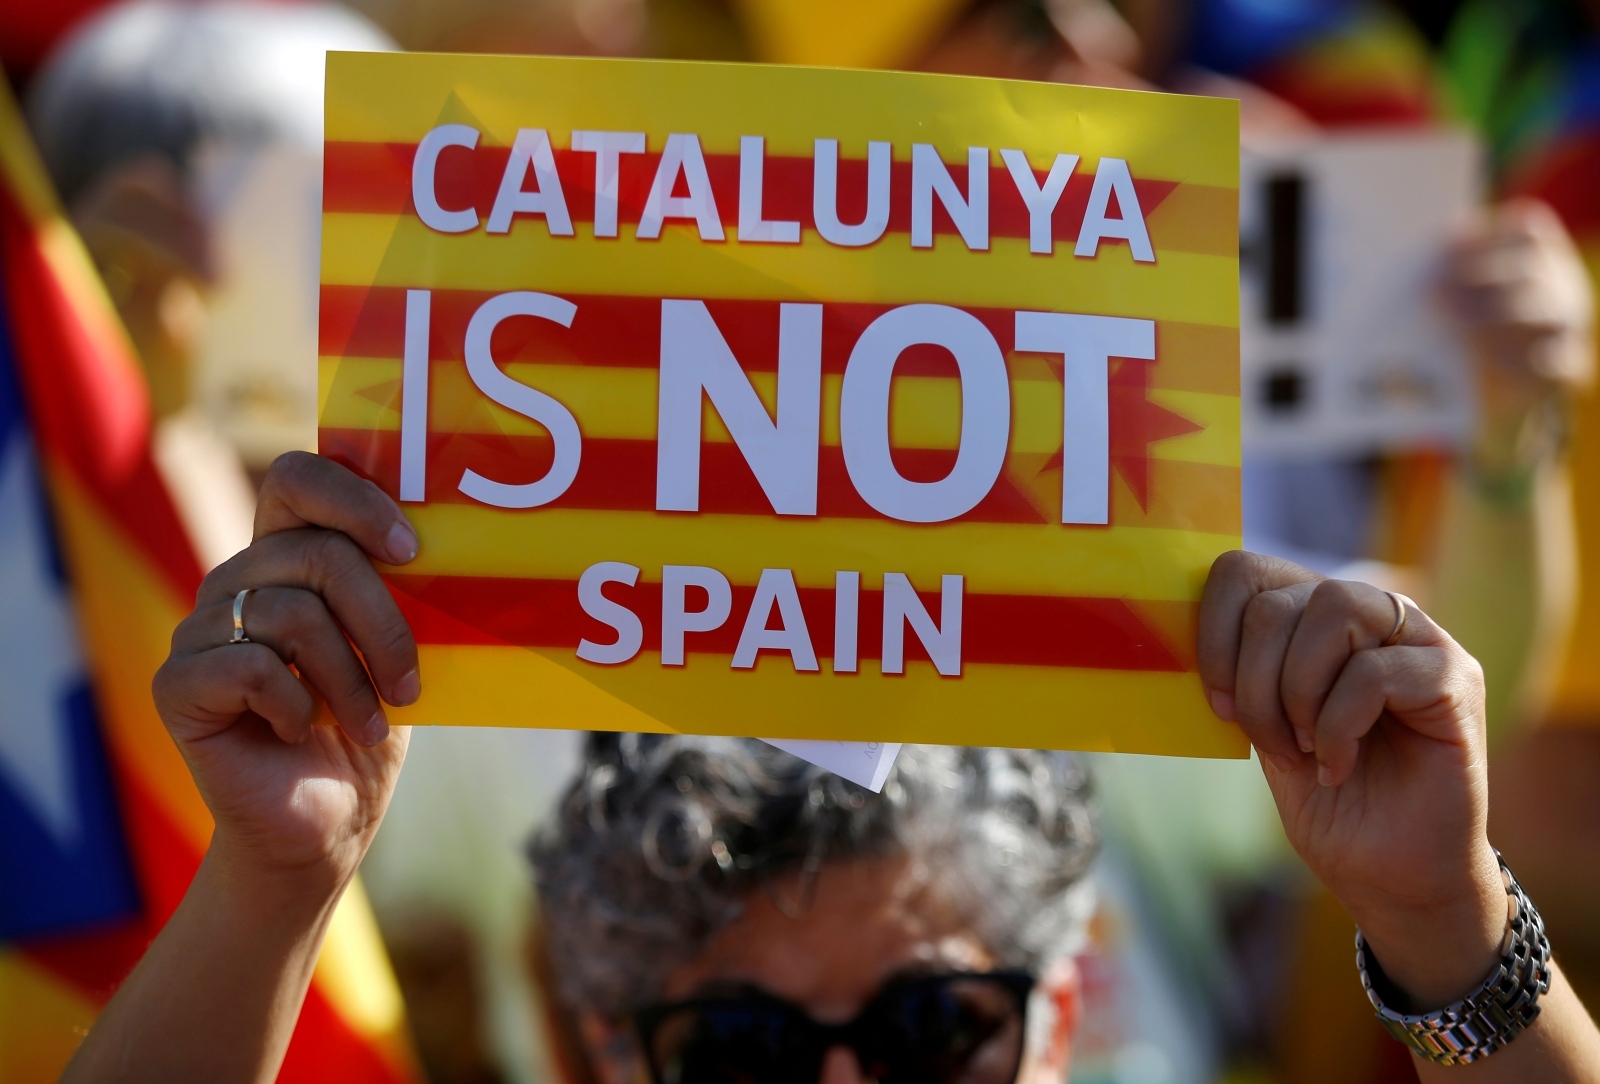 FILE PHOTO: A protester holds a poster with the slogan "Catalunya is not Spain" during a demonstration to ask for the Parliament inclusion of the 3 Catalan elected MEP's in front of the European Parliament in Strasbourg FILE PHOTO: A protester holds a poster with the slogan "Catalunya is not Spain" during a demonstration to ask for the Parliament inclusion of the 3 Catalan elected MEP's Puigdemont, Oriol Junqueras and Toni Comin, in front of the European Parliament in Strasbourg, France, July 2, 2019. REUTERS/Vincent Kessler/File Photo Vincent Kessler